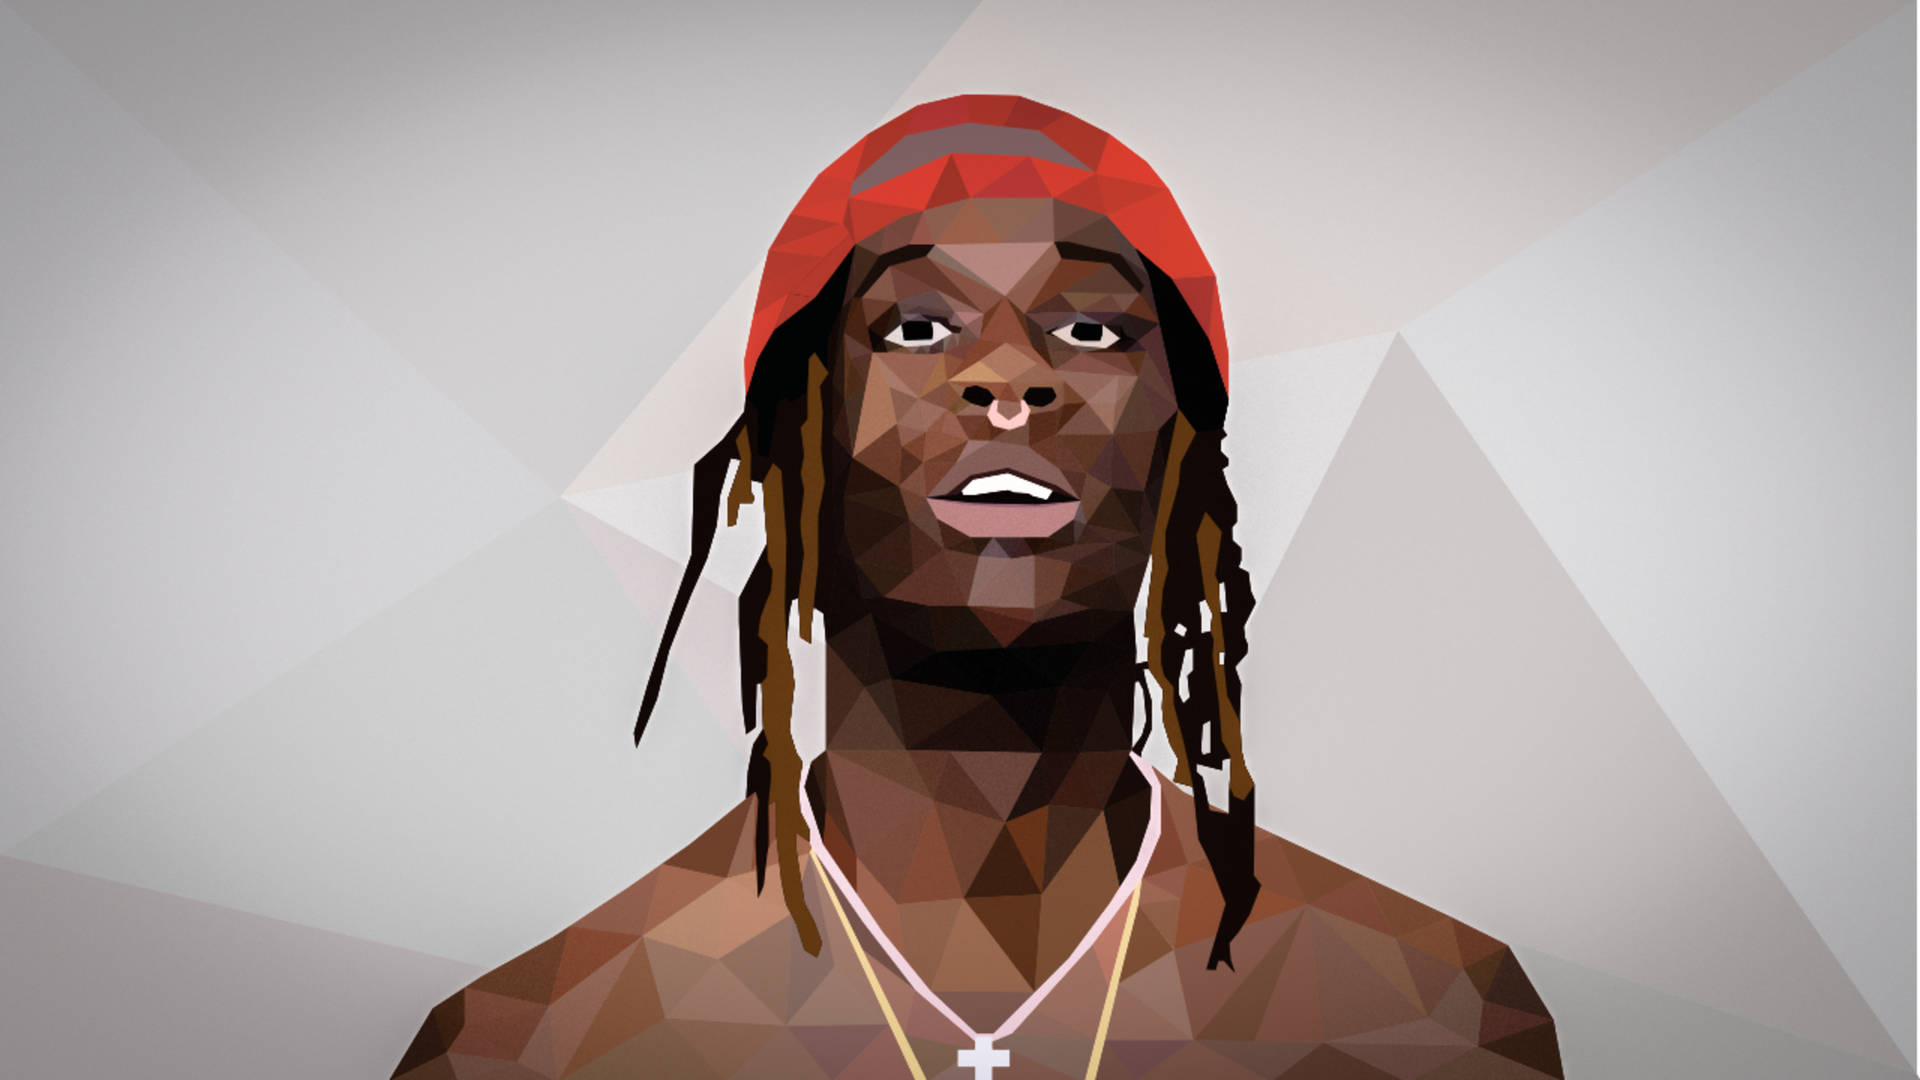 Join Young Thug On A Musical Journey Through A Vibrant And Abstract World Background